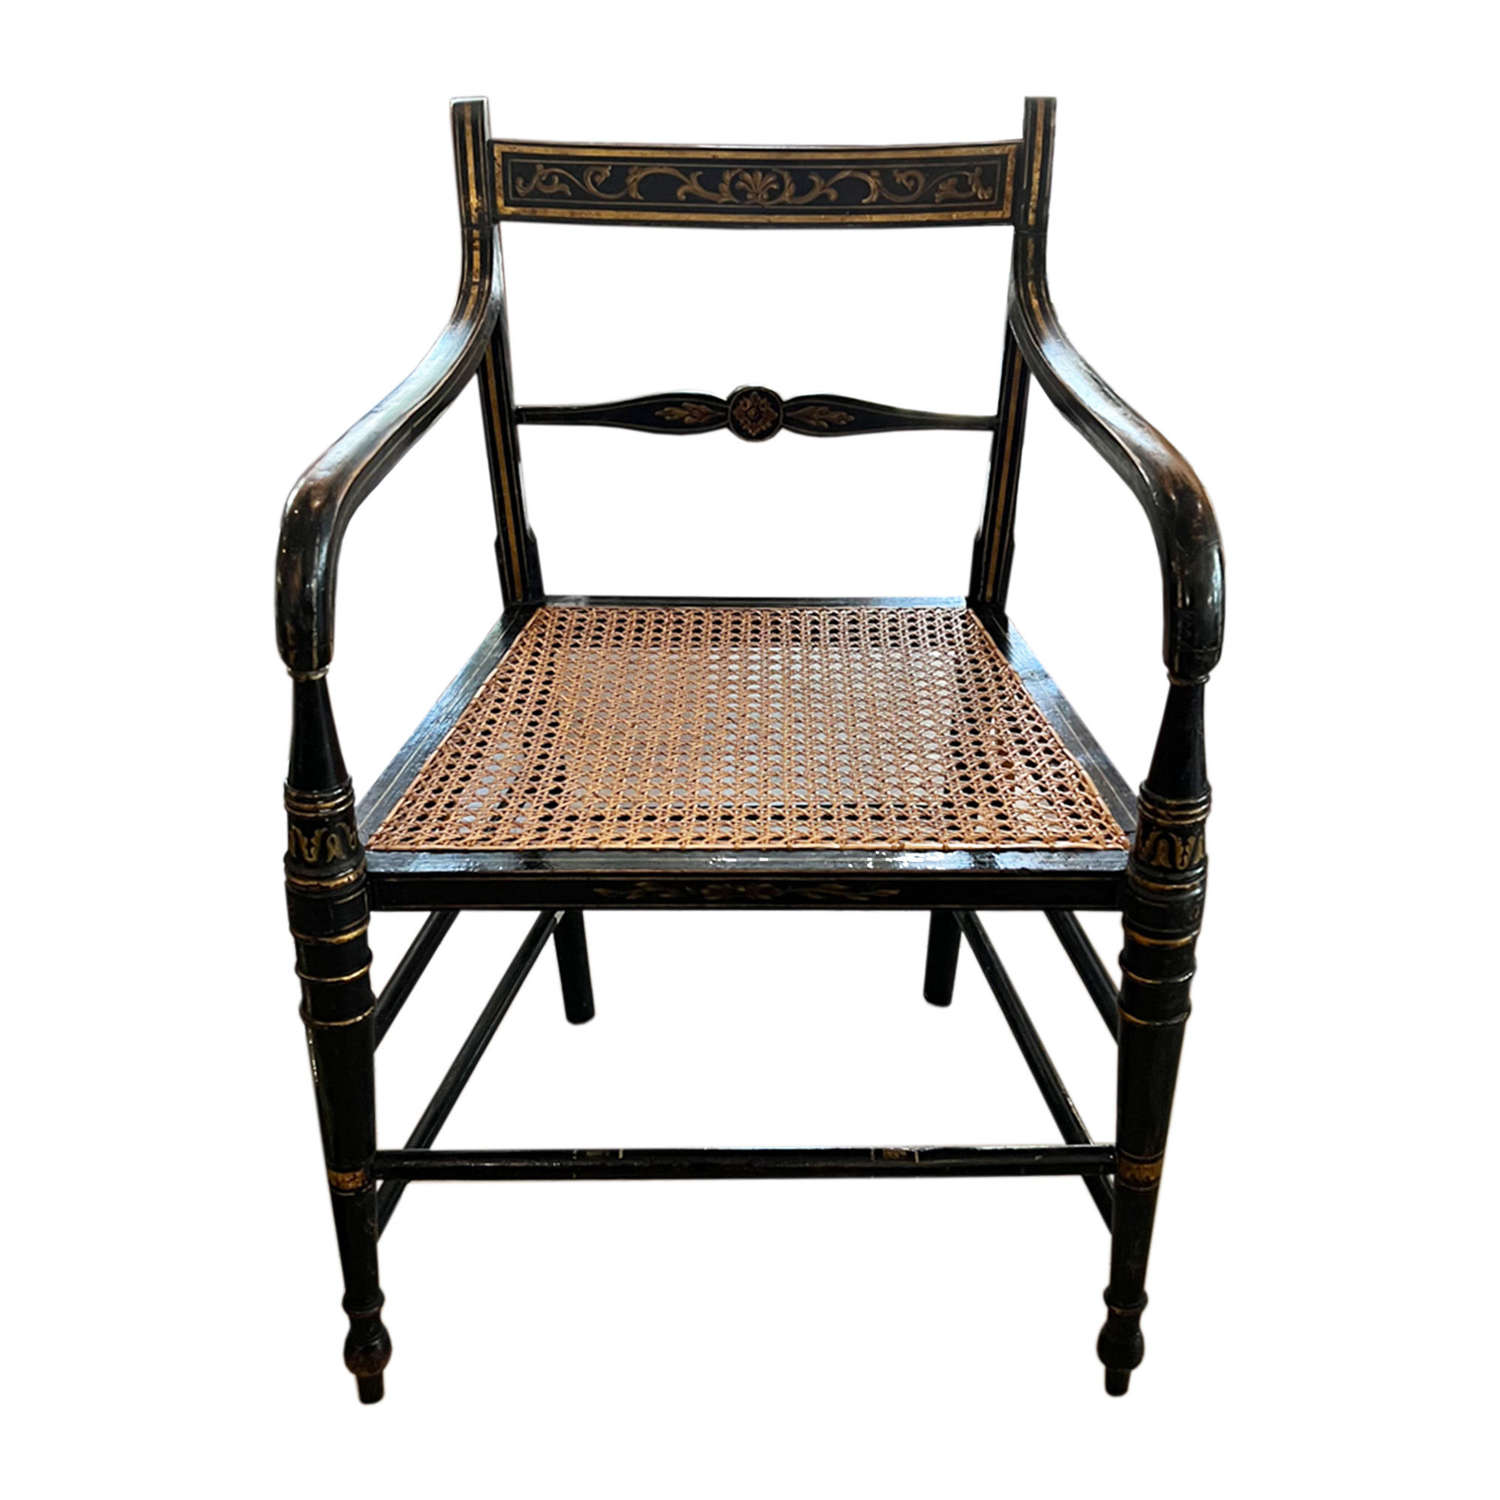 Ebonised and Gilt Wood Regency Chair With Cane Seat